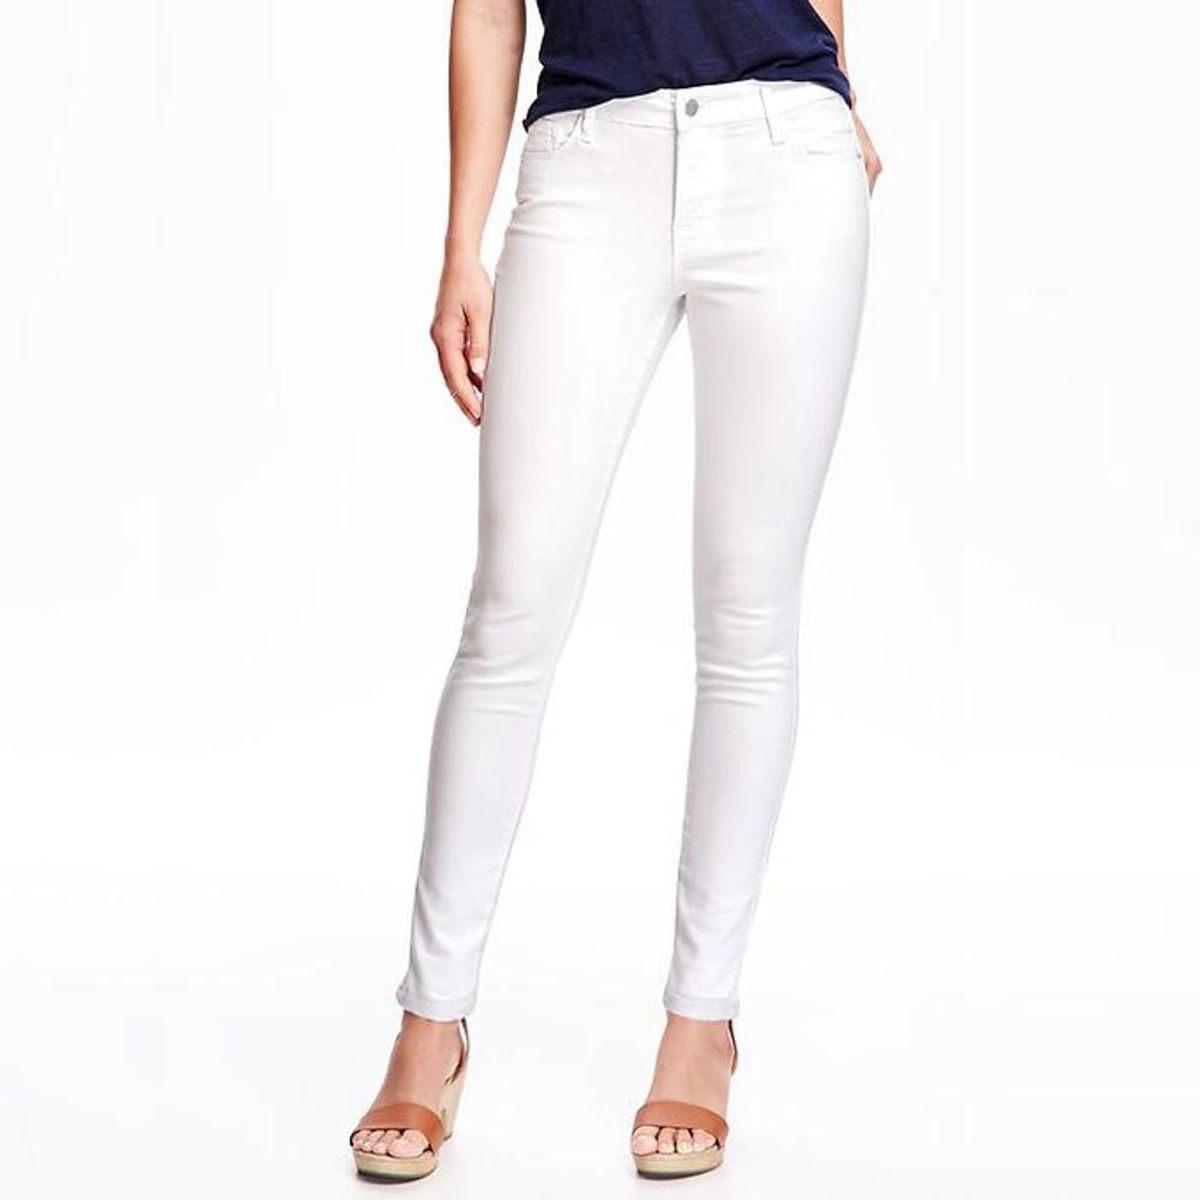 Old Navy’s New Stain-Free Jeans Are a Clumsy Girl’s Dream Come True